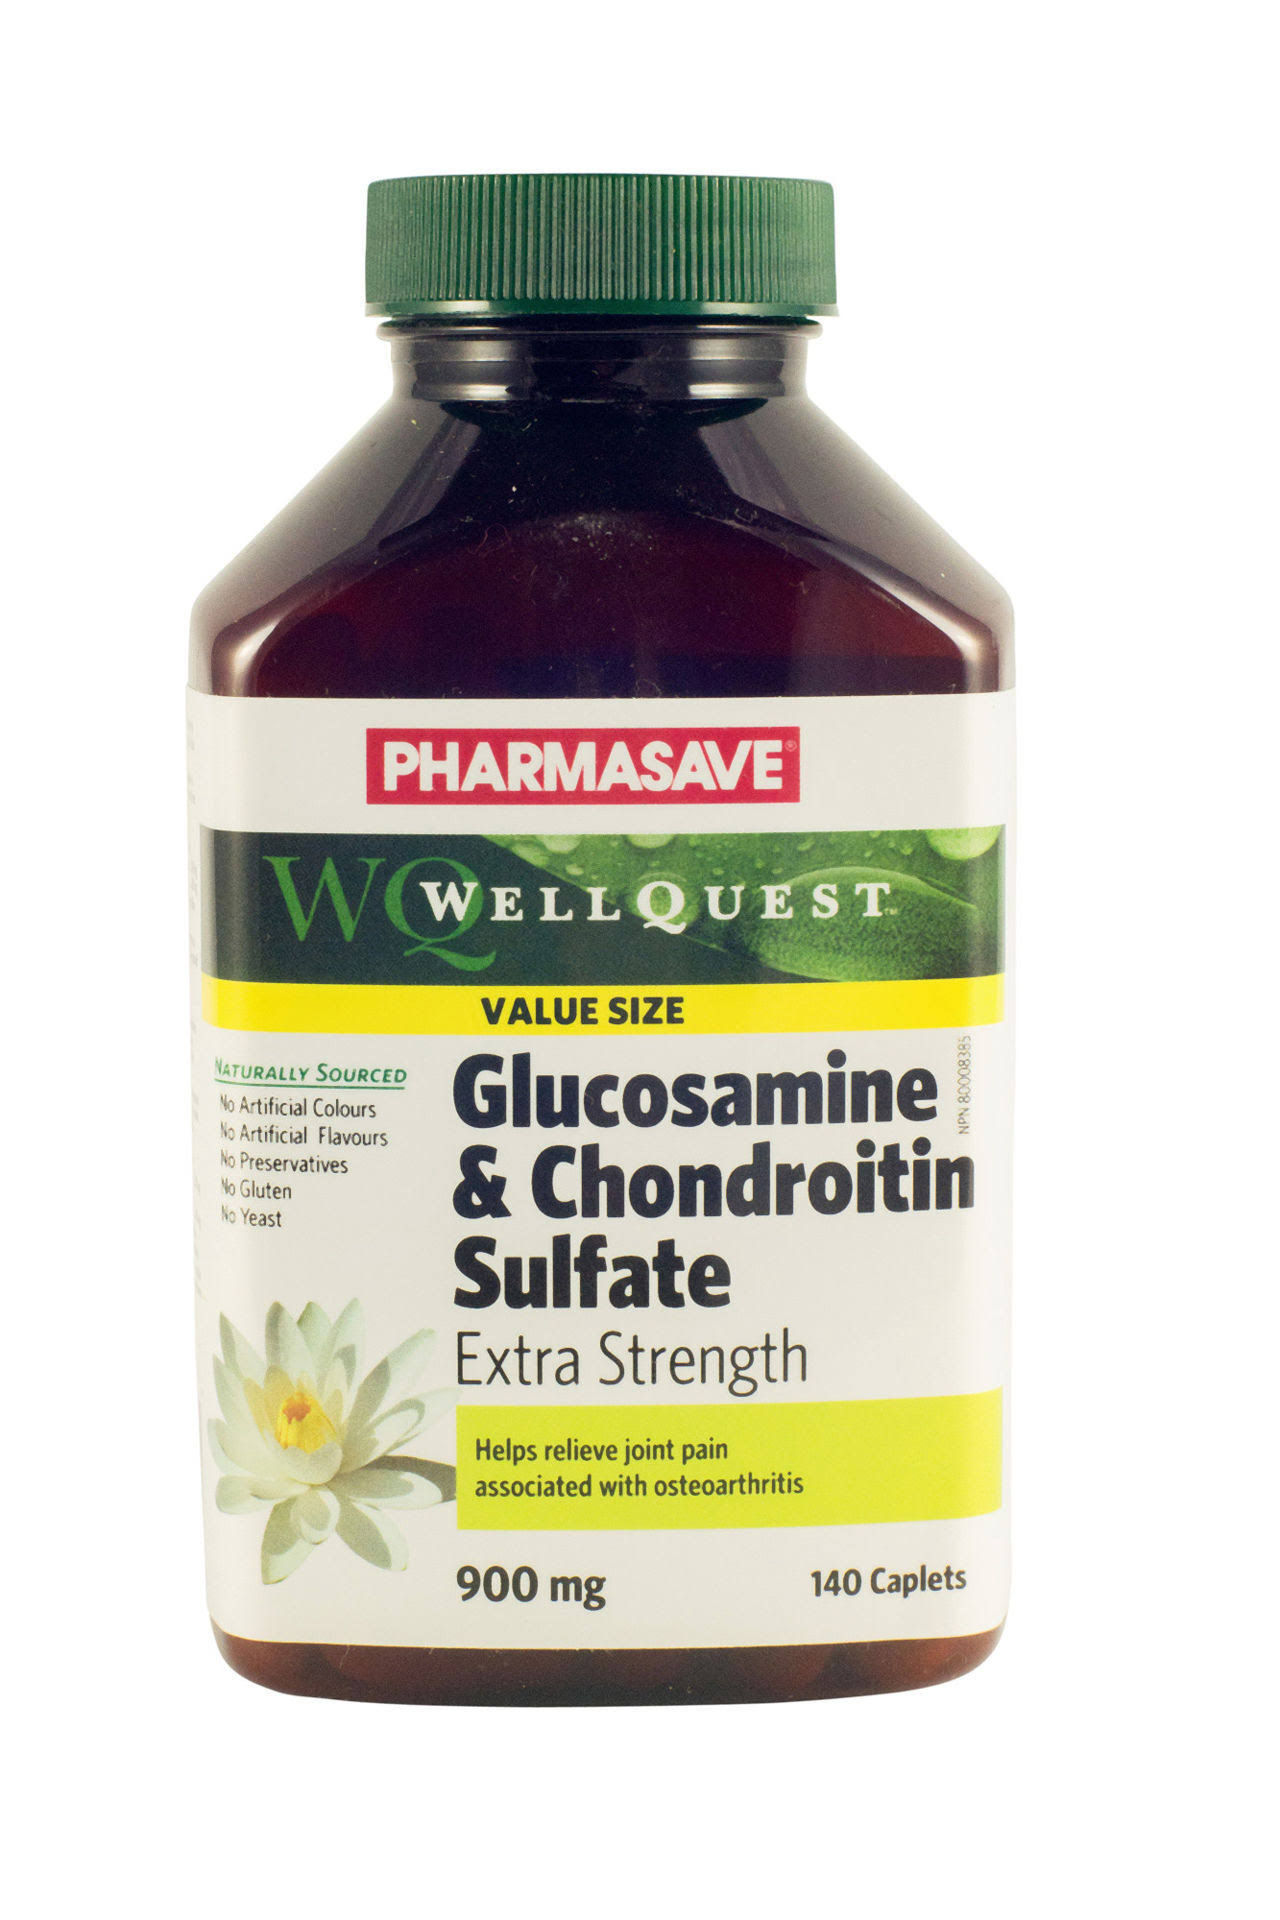 PHARMASAVE WELLQUEST GLUCOSAMINE & CHONDROITIN SULFATE CAPLET 900MG 140S